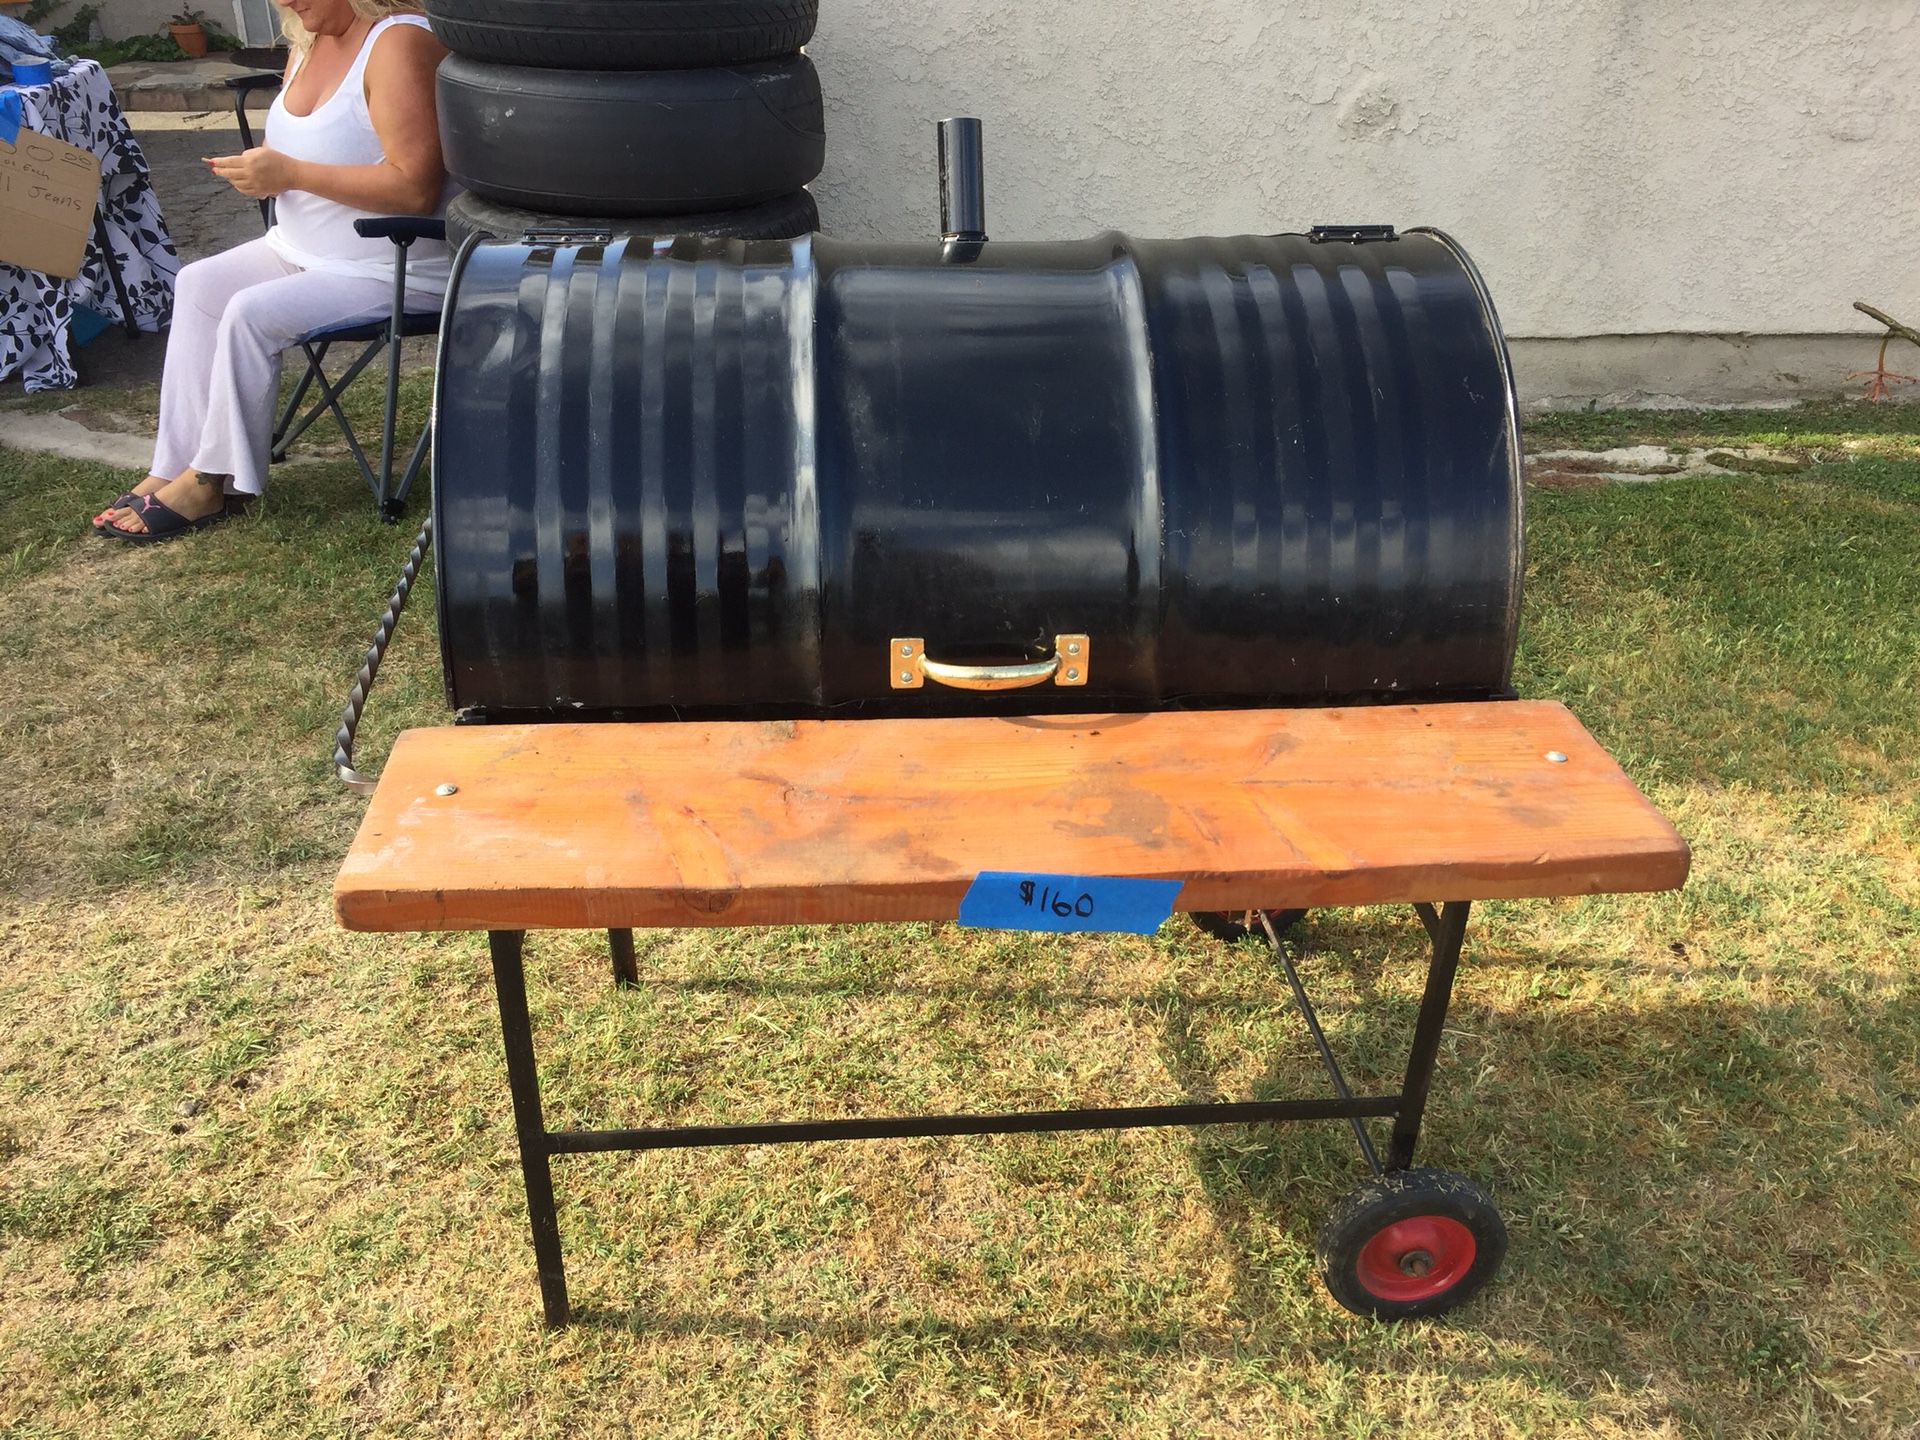 55 gallon barbecue made by sweet daddy rose really solid barbecue if you’re serious barbecue specialist